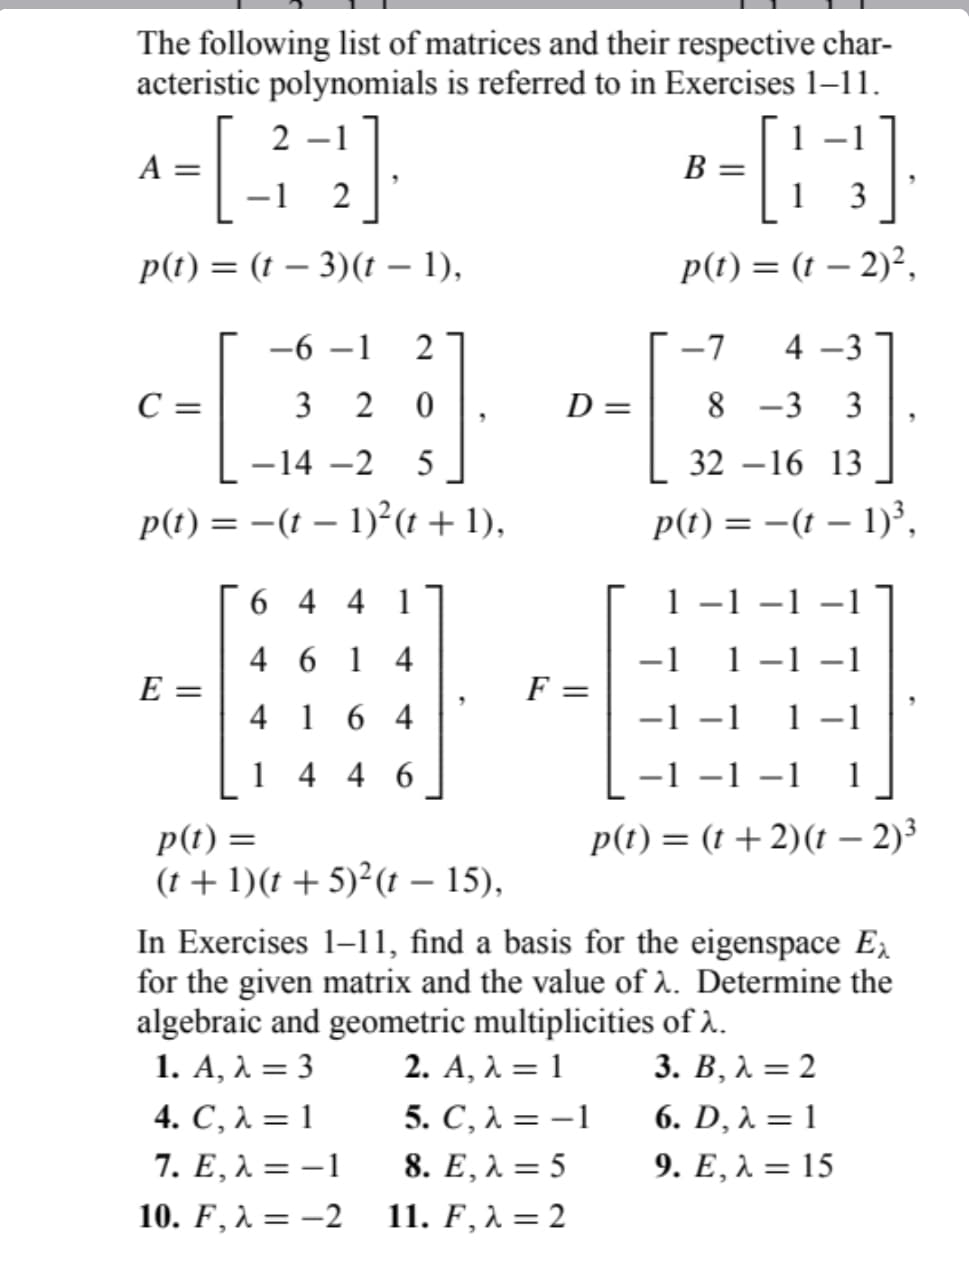 The following list of matrices and their respective char-
acteristic polynomials is referred to in Exercises 1-11.
- 1
[32]
p(t)= (t - 3)(t - 1),
A =
-6-1 2
3 2 0
-14 -2 5
p(t) = -(t − 1)²(t+ 1),
C =
E =
644 1
4614
4 164
1
446
p(t) =
(t+1)(t + 5)²(t — 15),
F
D =
B =
1 3
p(t) = (t - 2)²,
5. C, λ = -1
8. E, λ = 5
11. F, λ = 2
-7 4-3
8 -3 3
32-16 13
p(t) = −(t − 1)³,
1
-1
-1 -1
-1 −1
-1 −1
1 −1
−1 −1 −1 1
p(t) = (t + 2)(t – 2)³
In Exercises 1-11, find a basis for the eigenspace Ex
for the given matrix and the value of λ. Determine the
algebraic and geometric multiplicities of λ.
2. A, λ = 1
3. B, λ =2
1. A, λ = 3
4. C, λ = 1
7. E, λ = -1
10. F, λ = -2
6. D, λ = 1
9. E, λ = 15